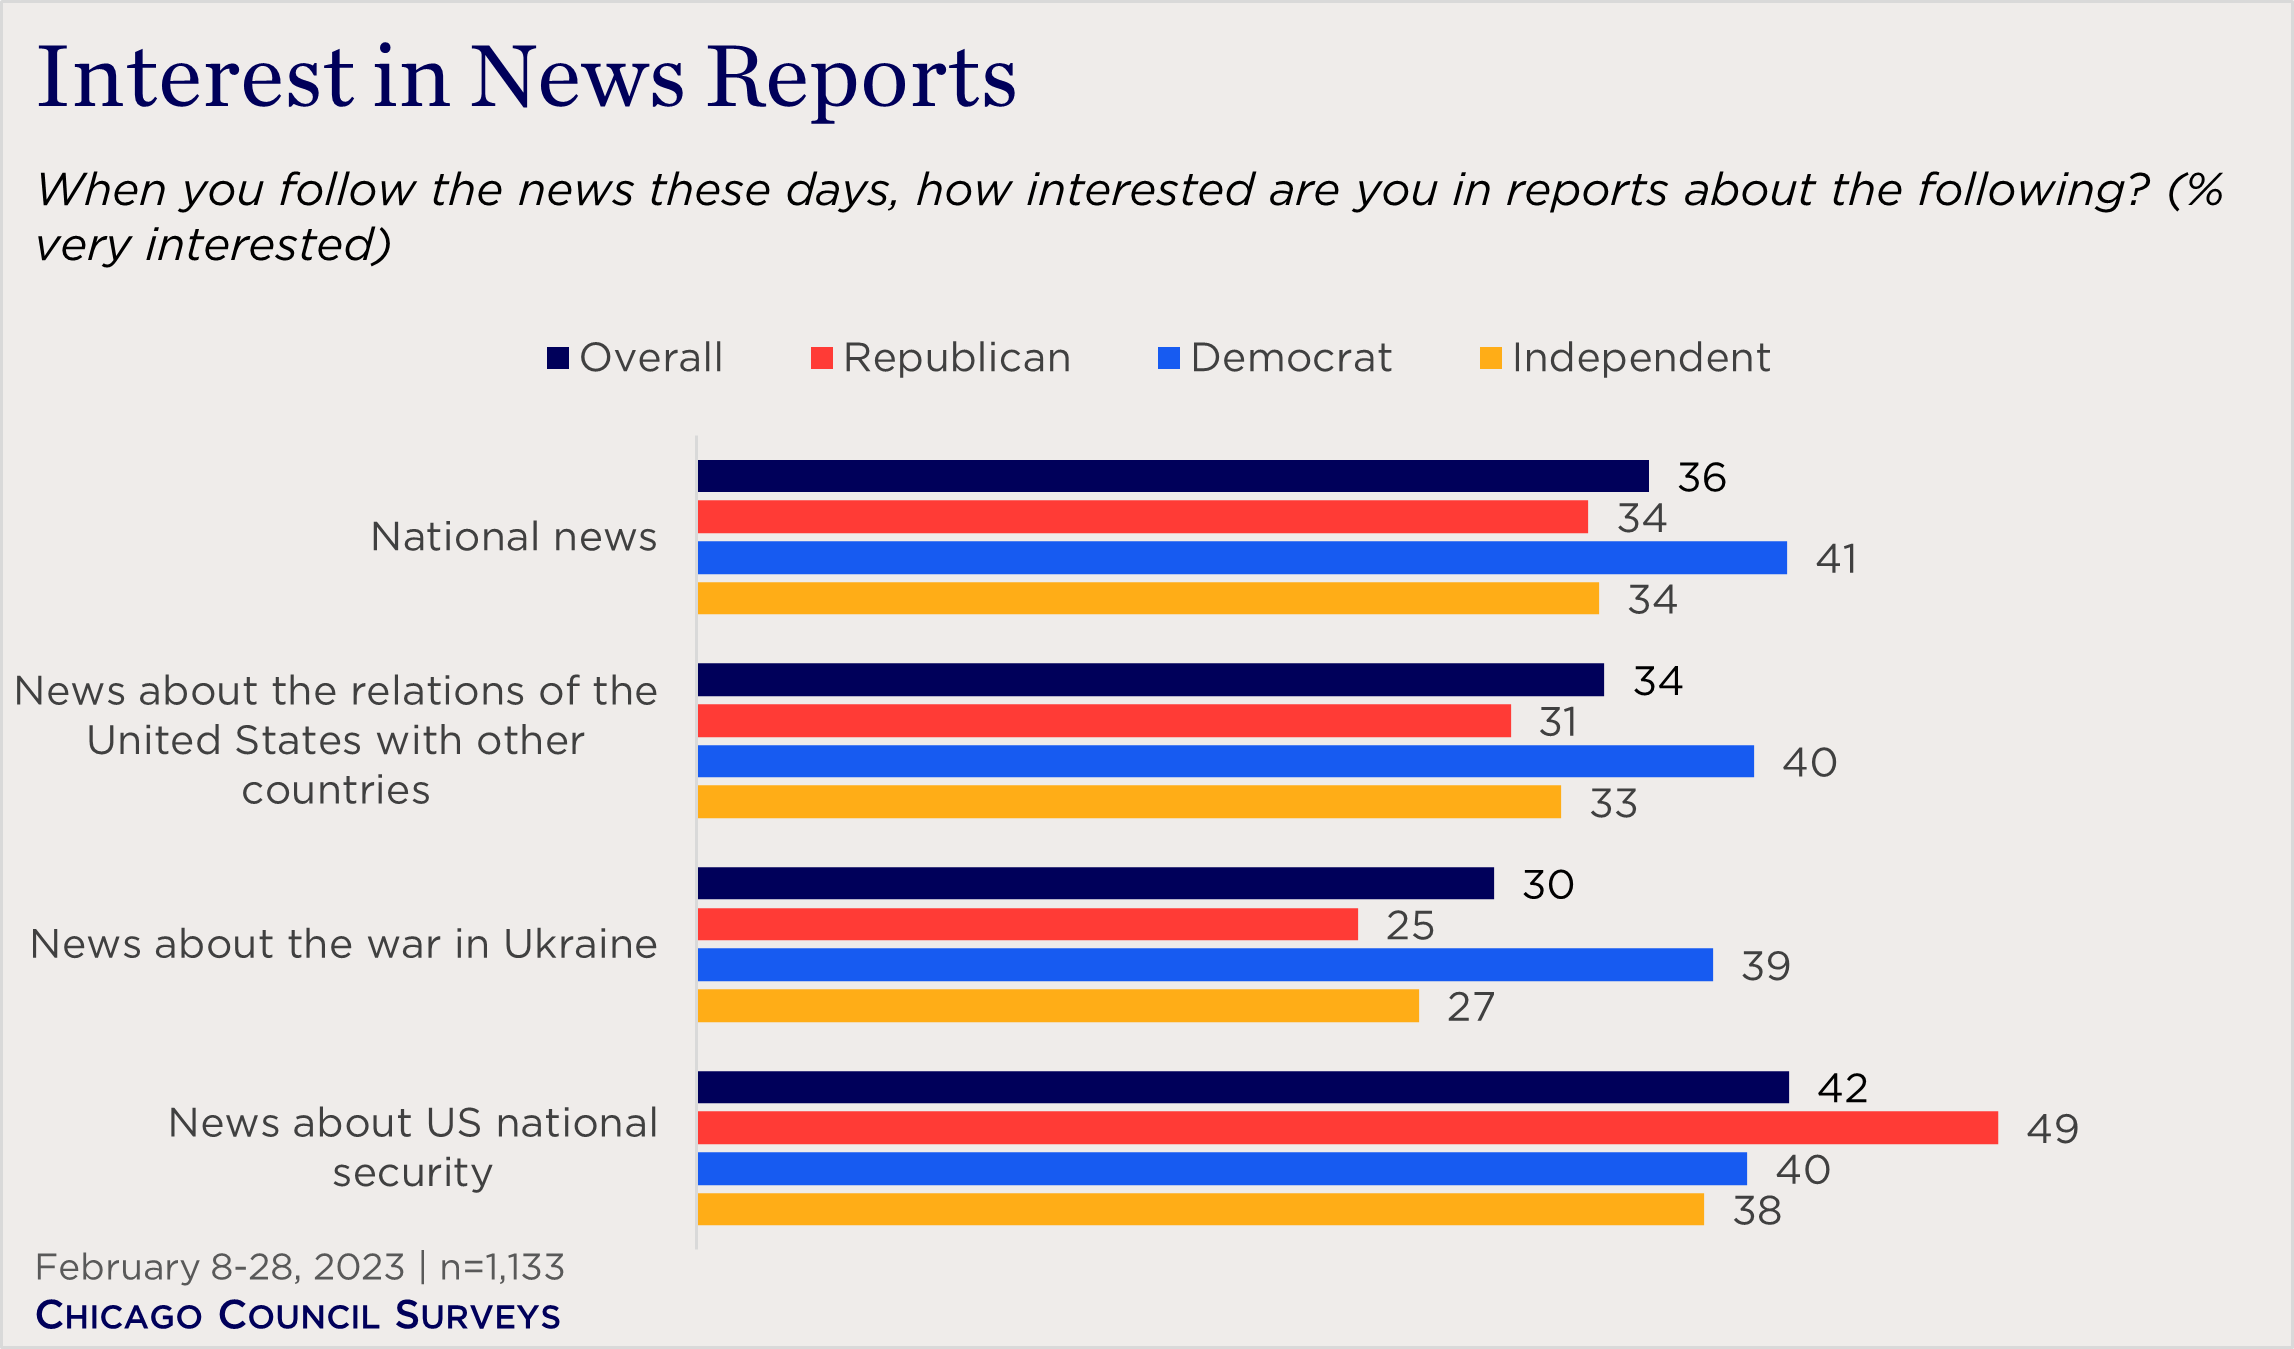 "bar chart showing interest in various news topics by party"